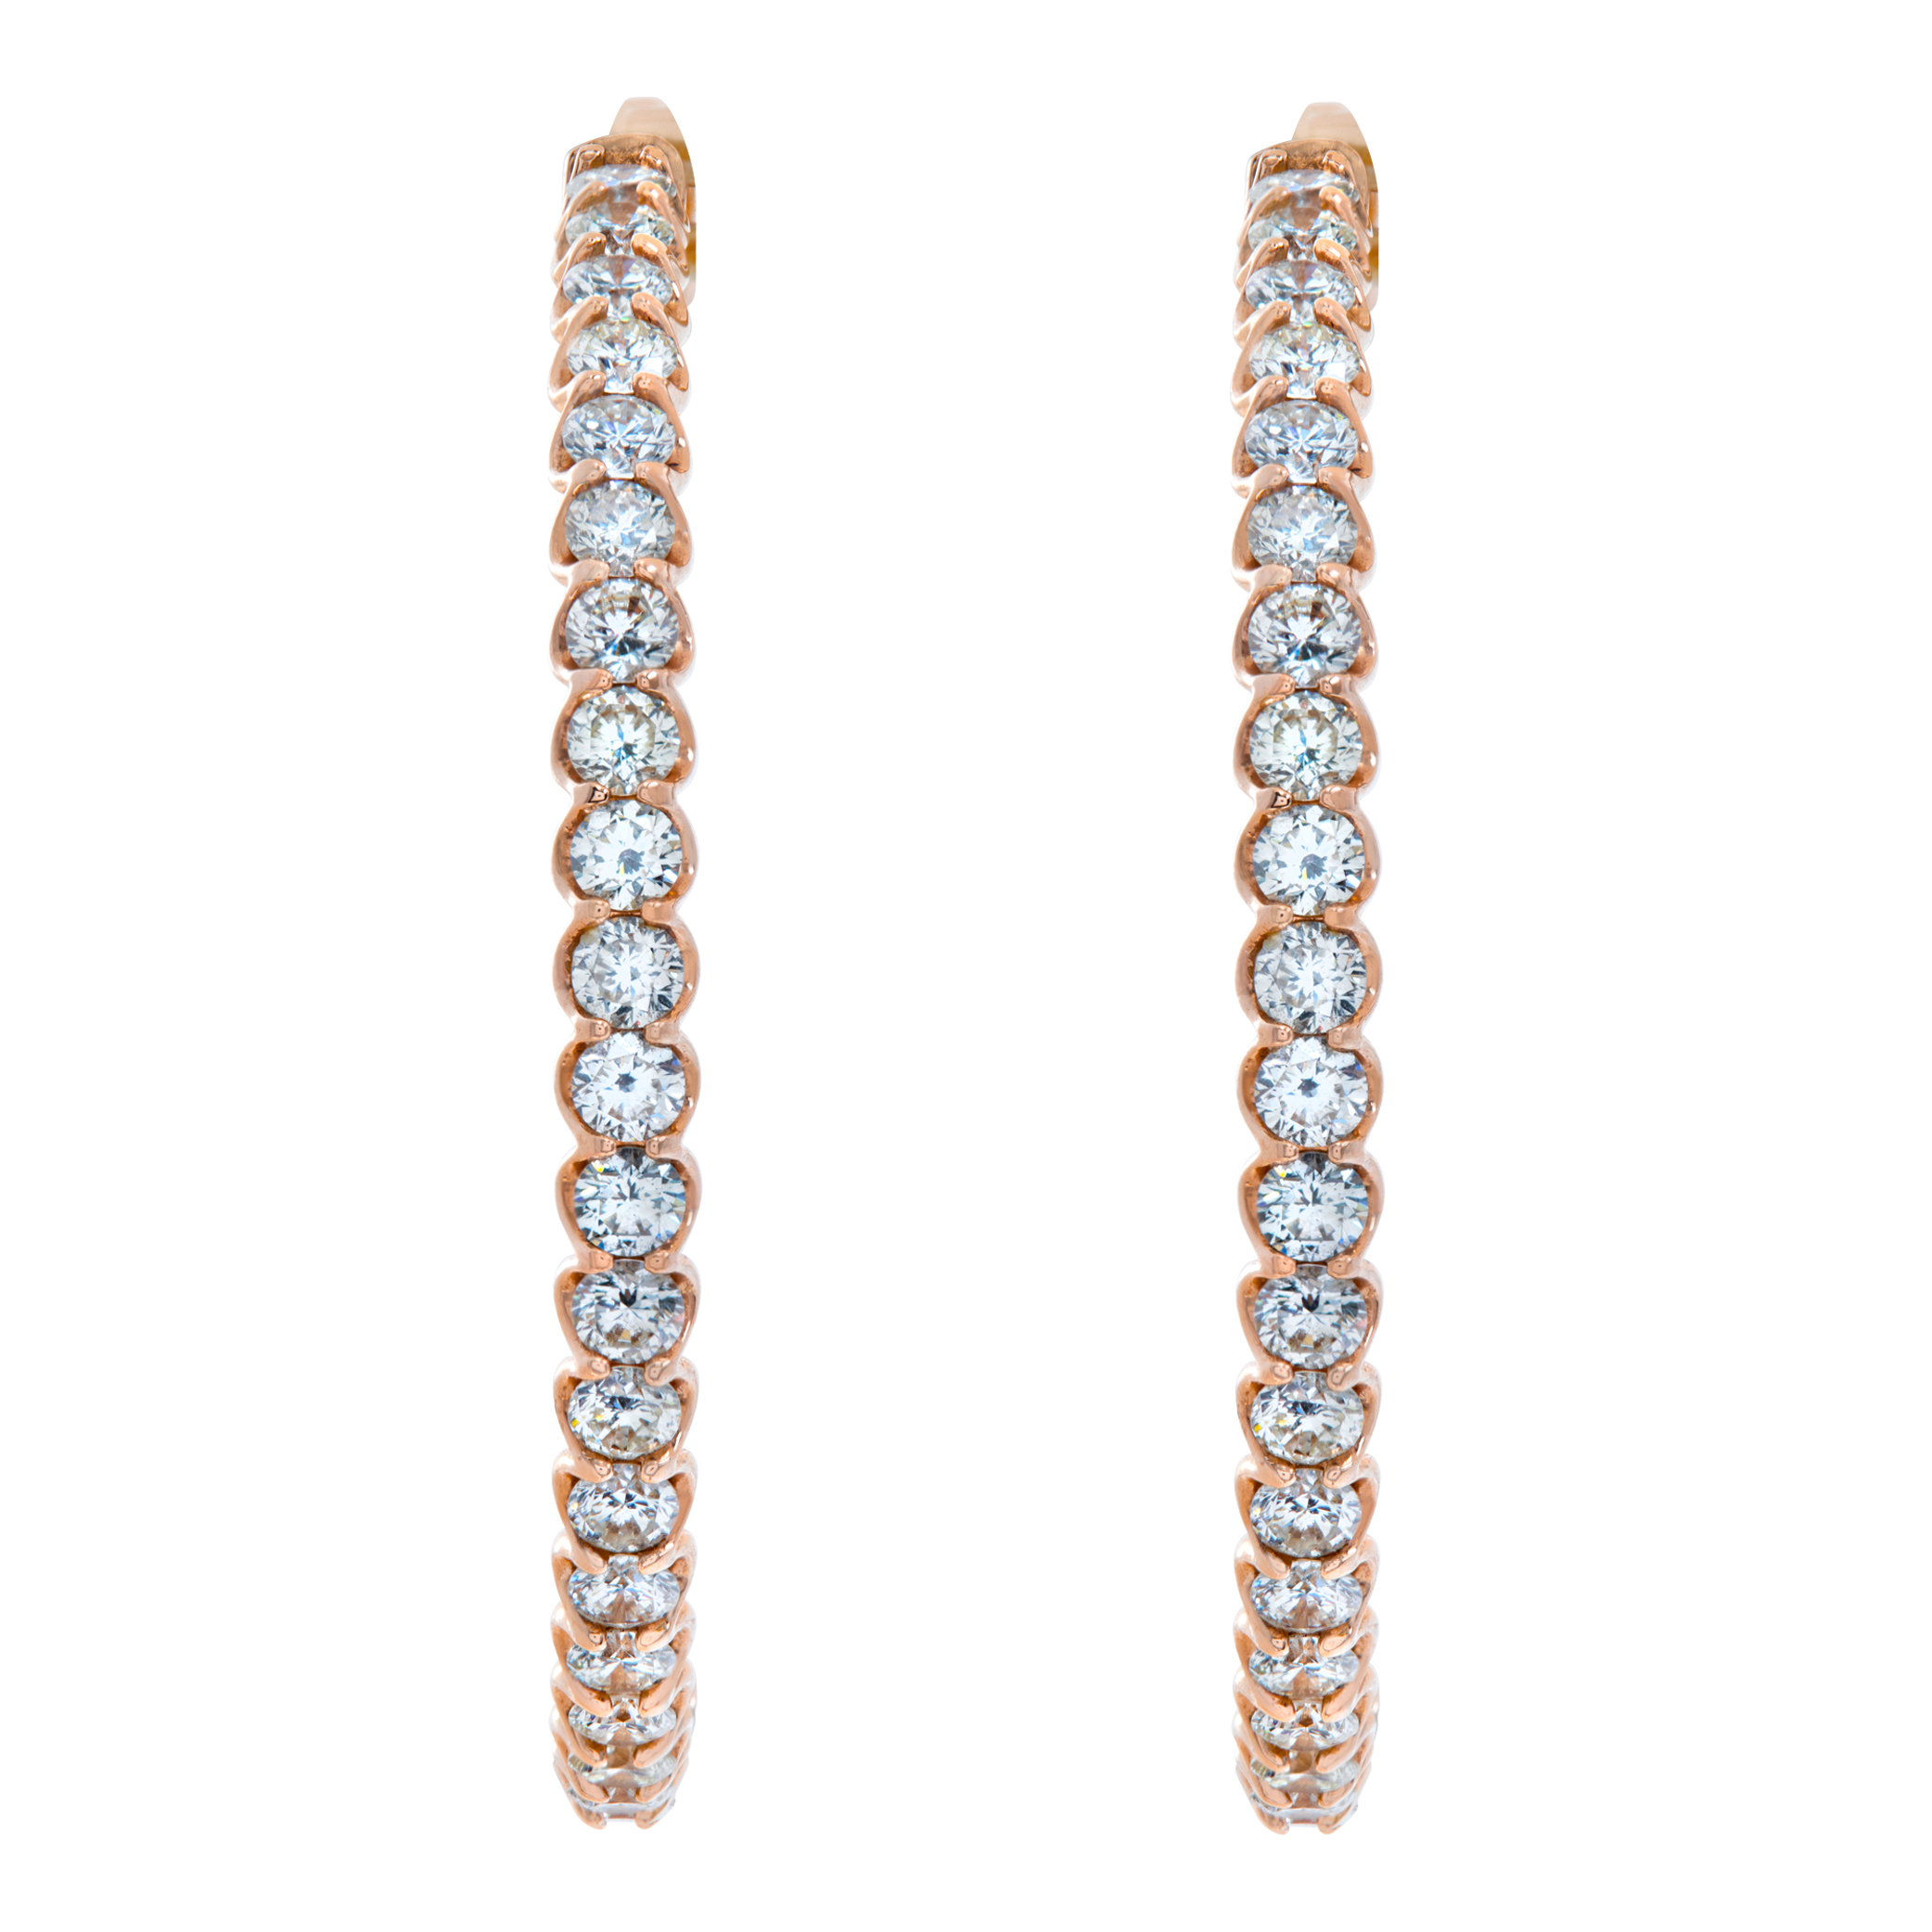 Inside-out large diamond hoops with 5.02 carats in 14k rose gold (Stones)